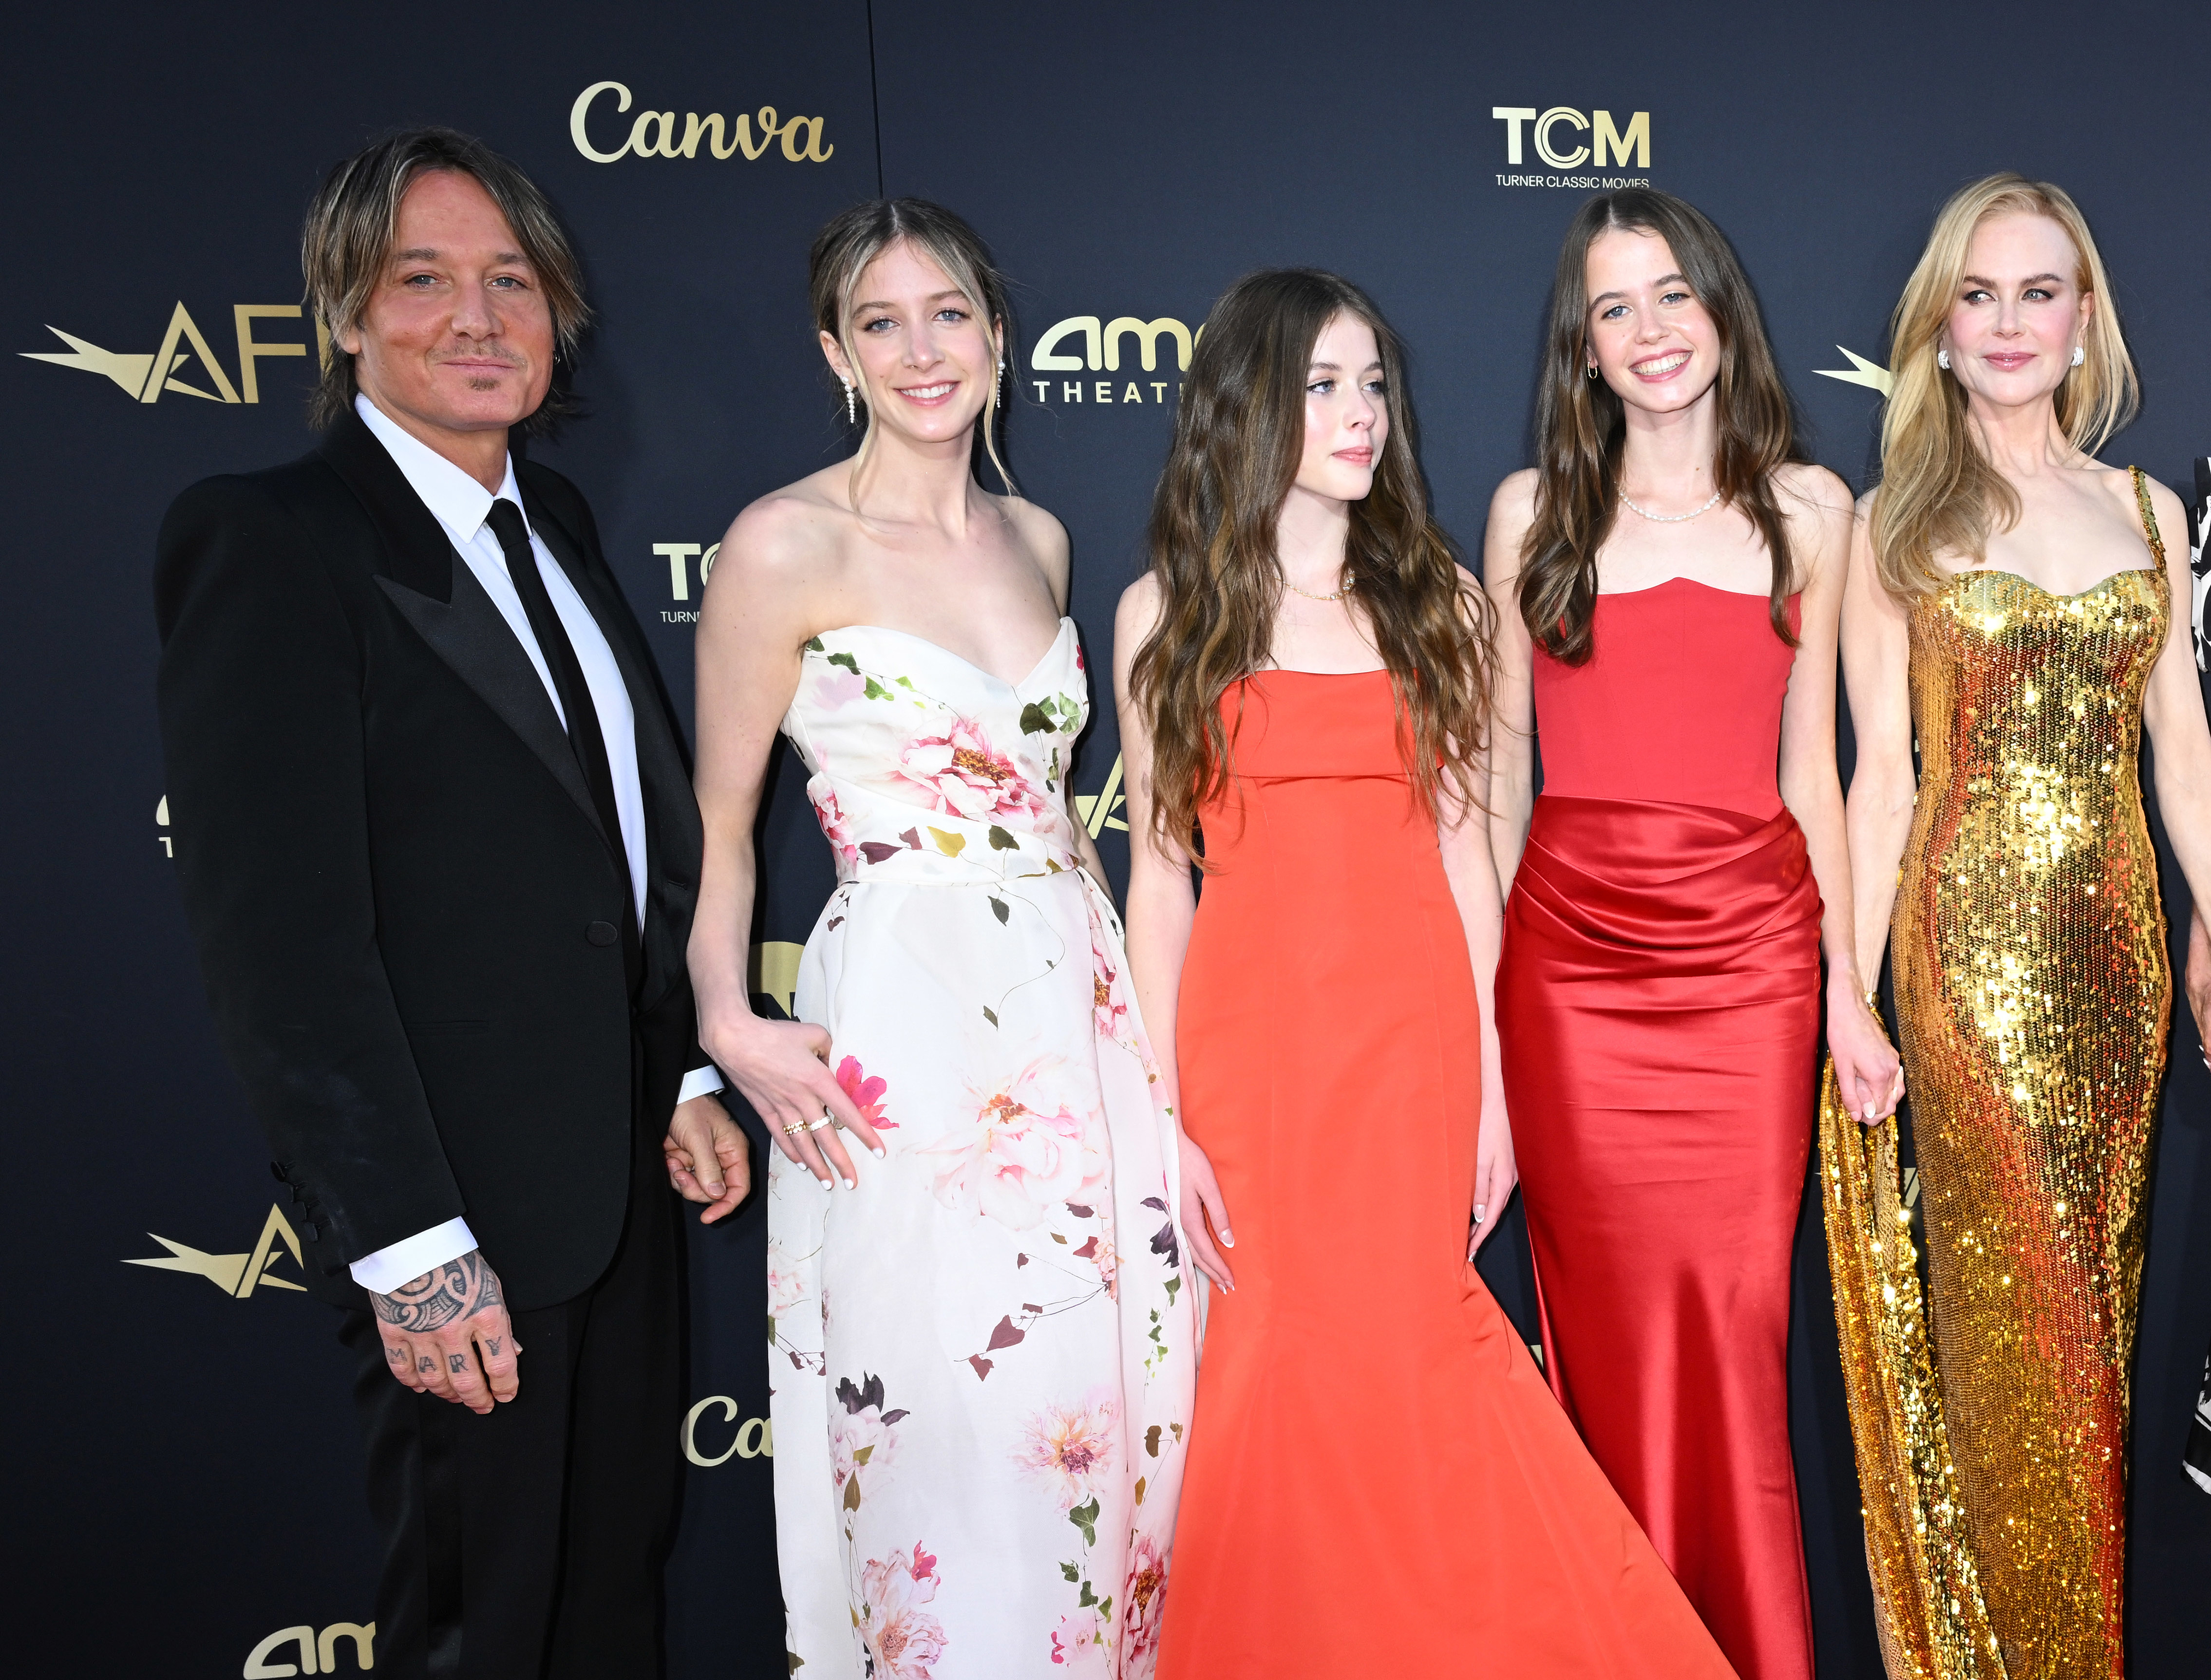 Keith Urban and Nicole Kidman with their daughters and niece